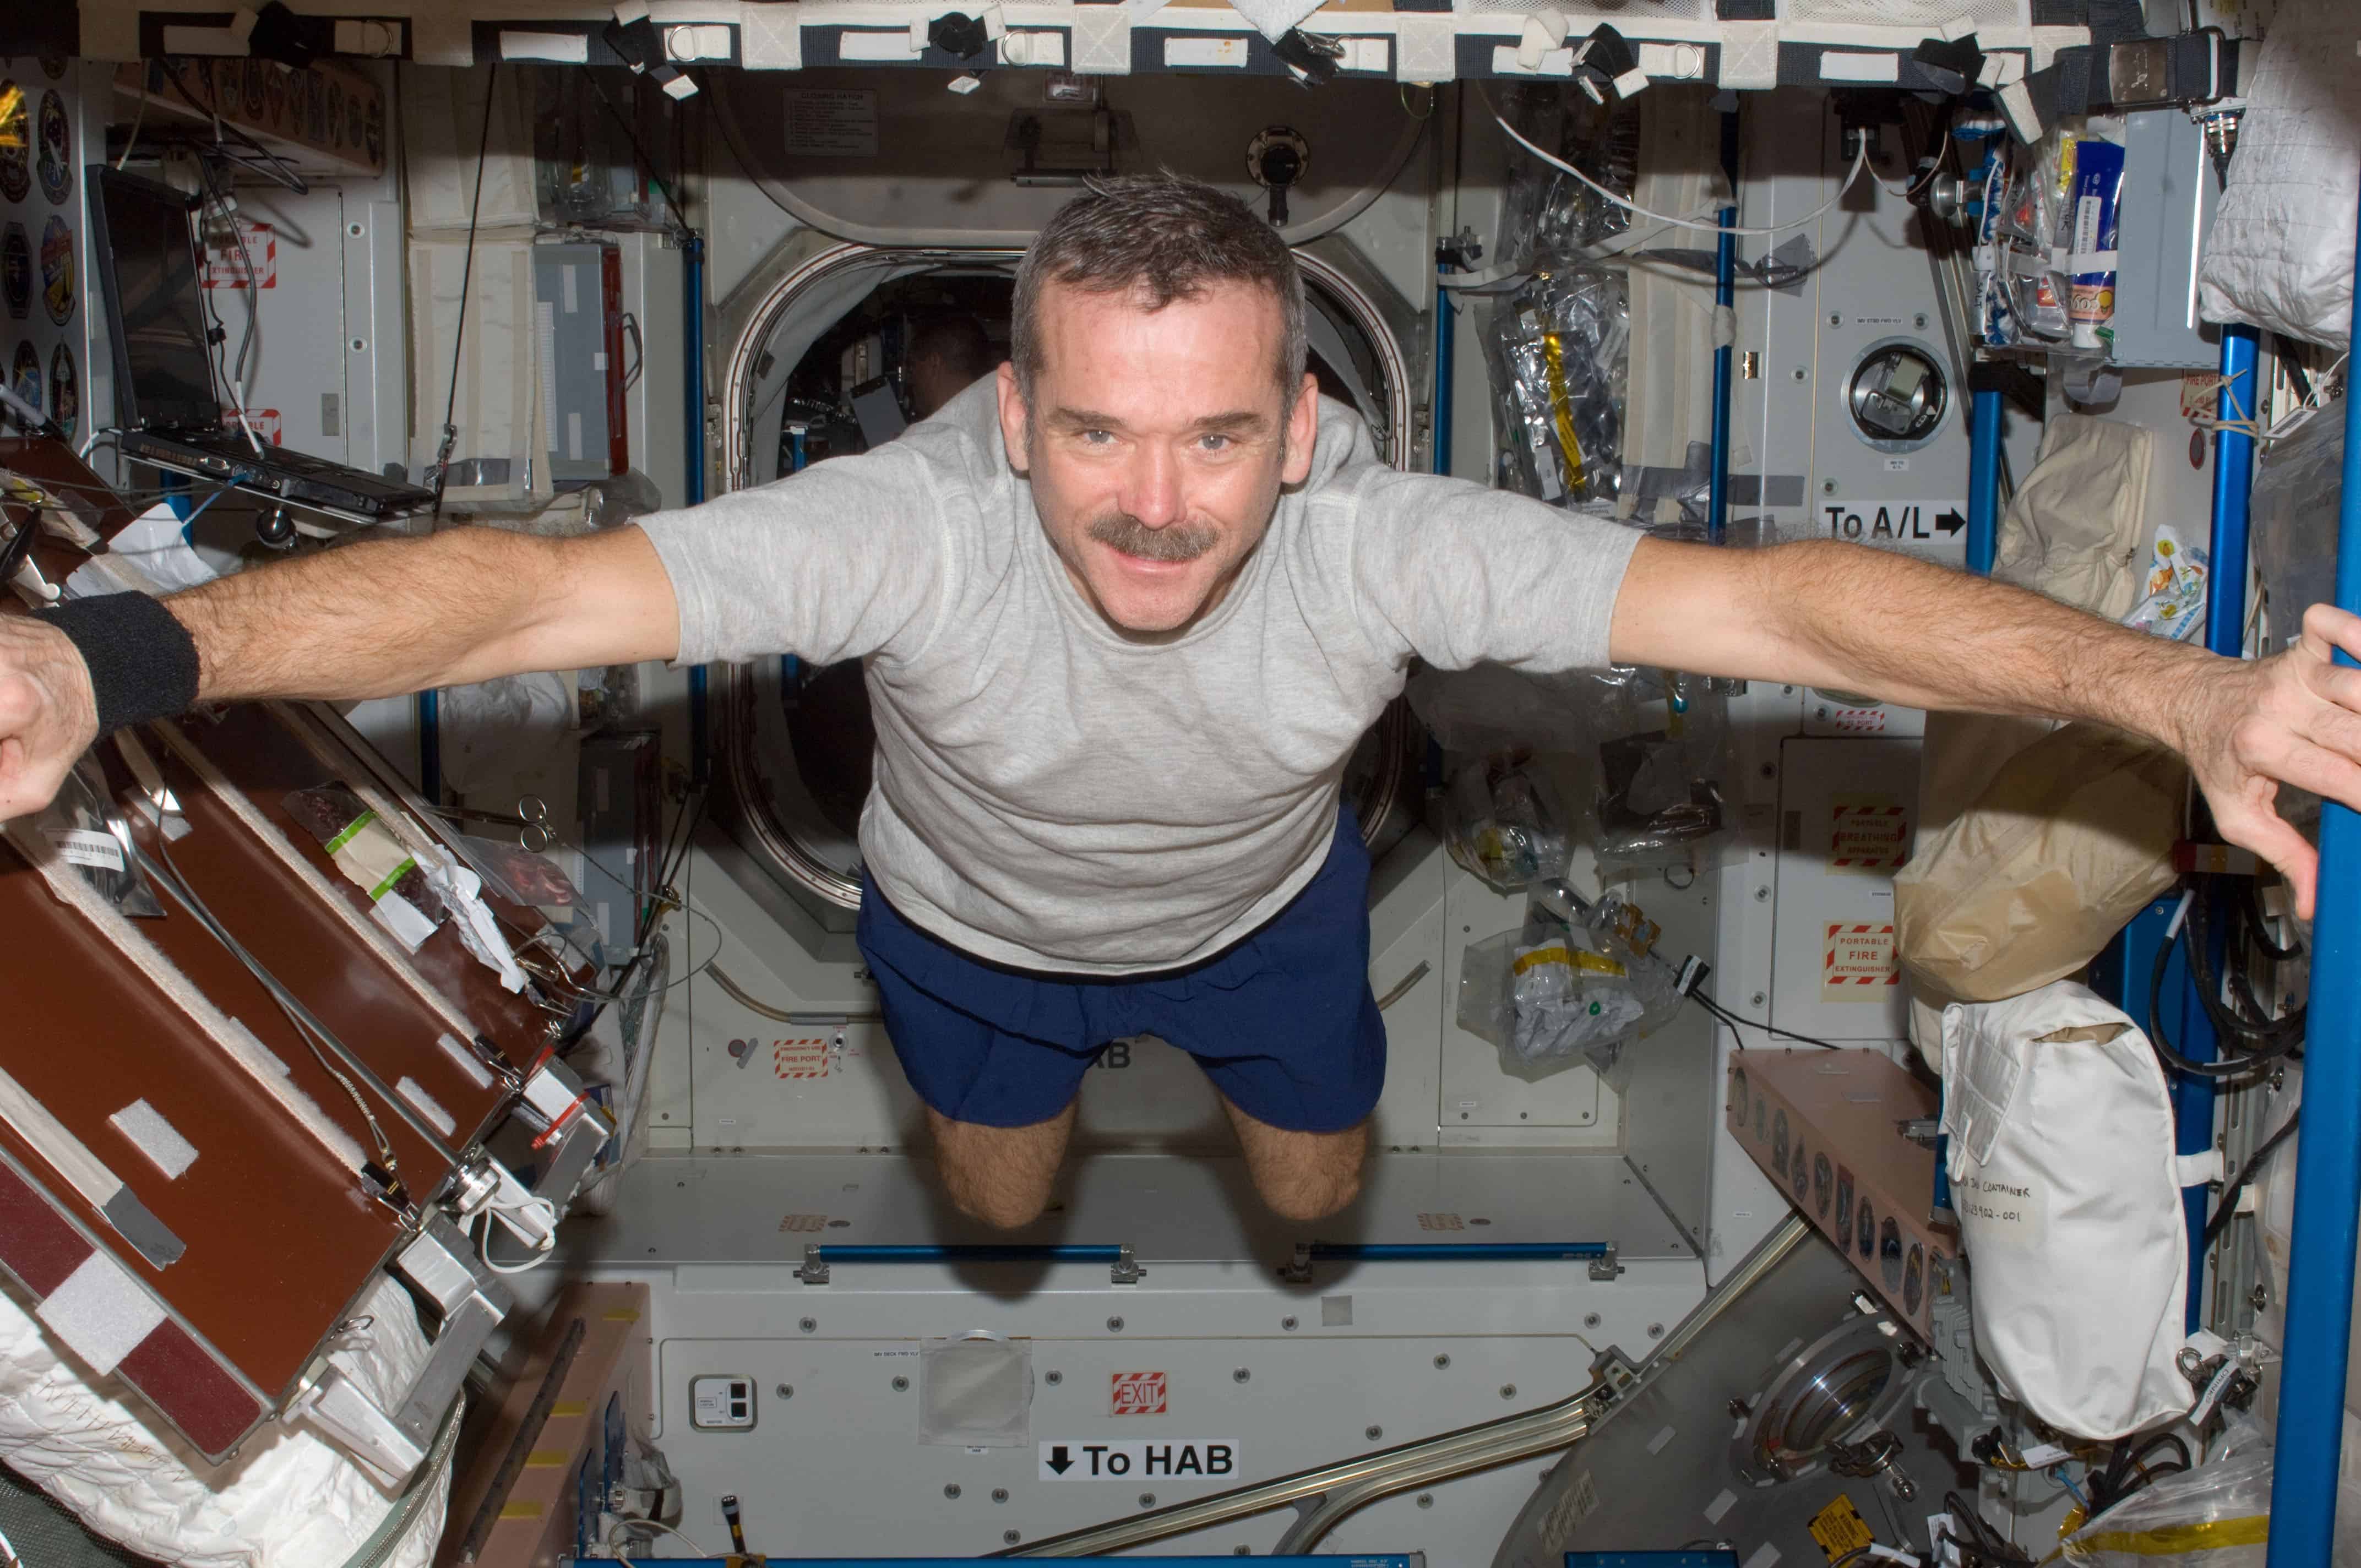 Canadian Space Agency astronaut Chris Hadfield on the International Space Station in 2012. Credit: NASA.